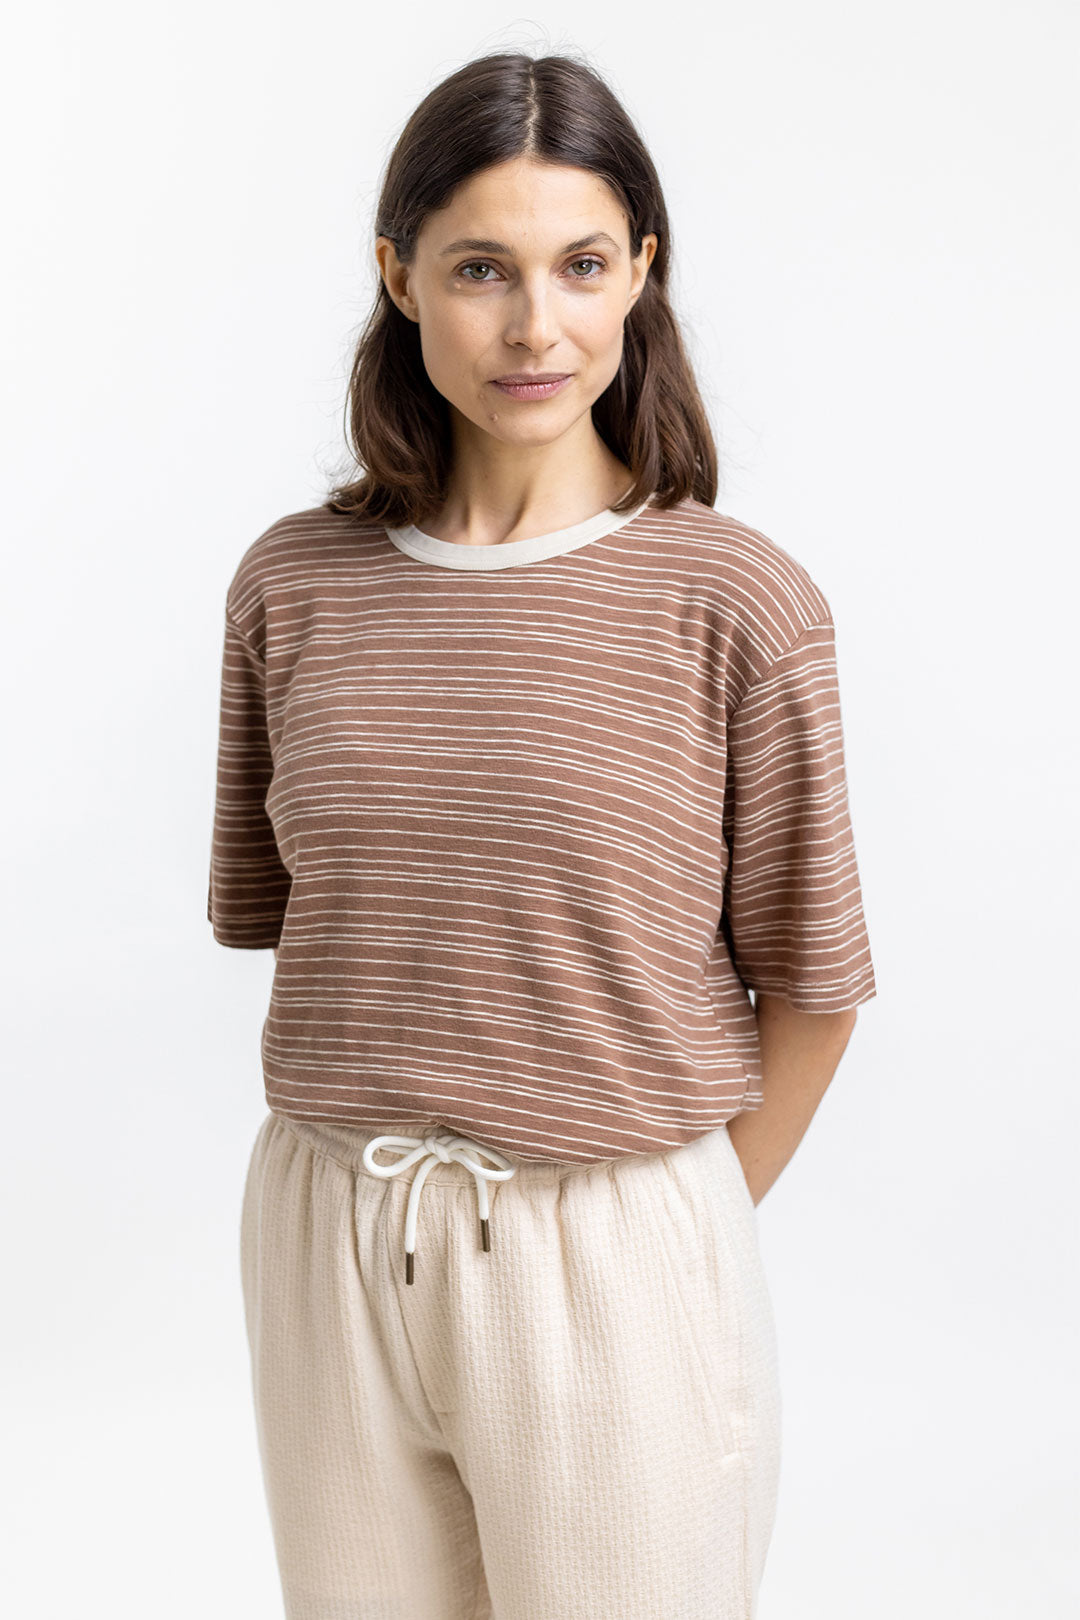 Brown, striped T-shirt made from 100% organic cotton from Rotholz